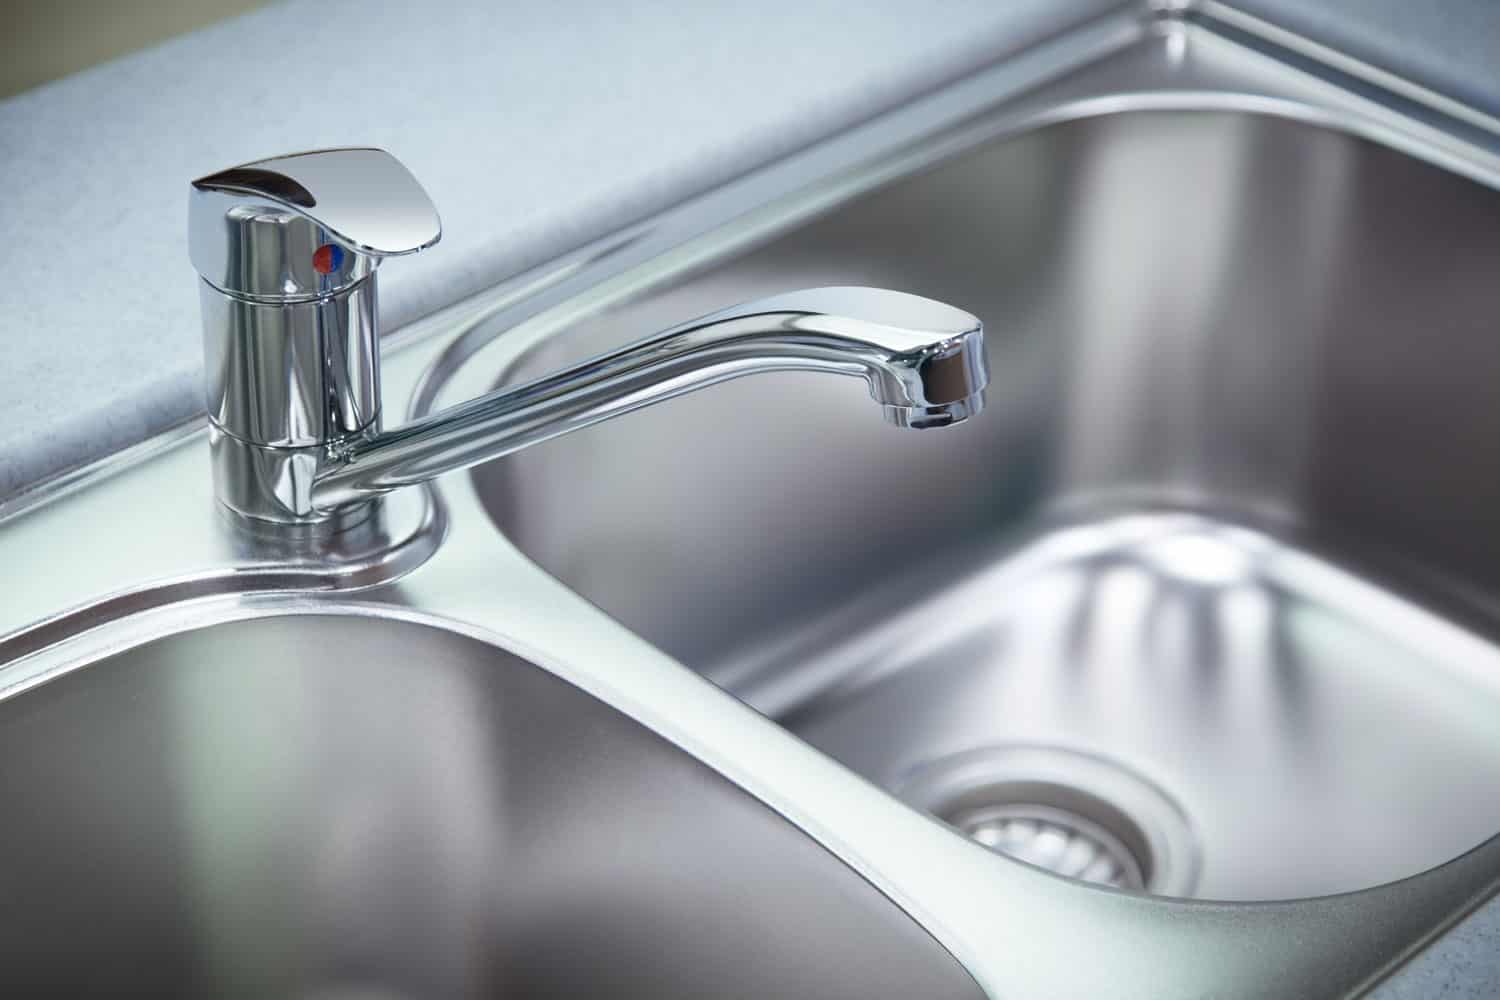 A stainless steel dual kitchen sink